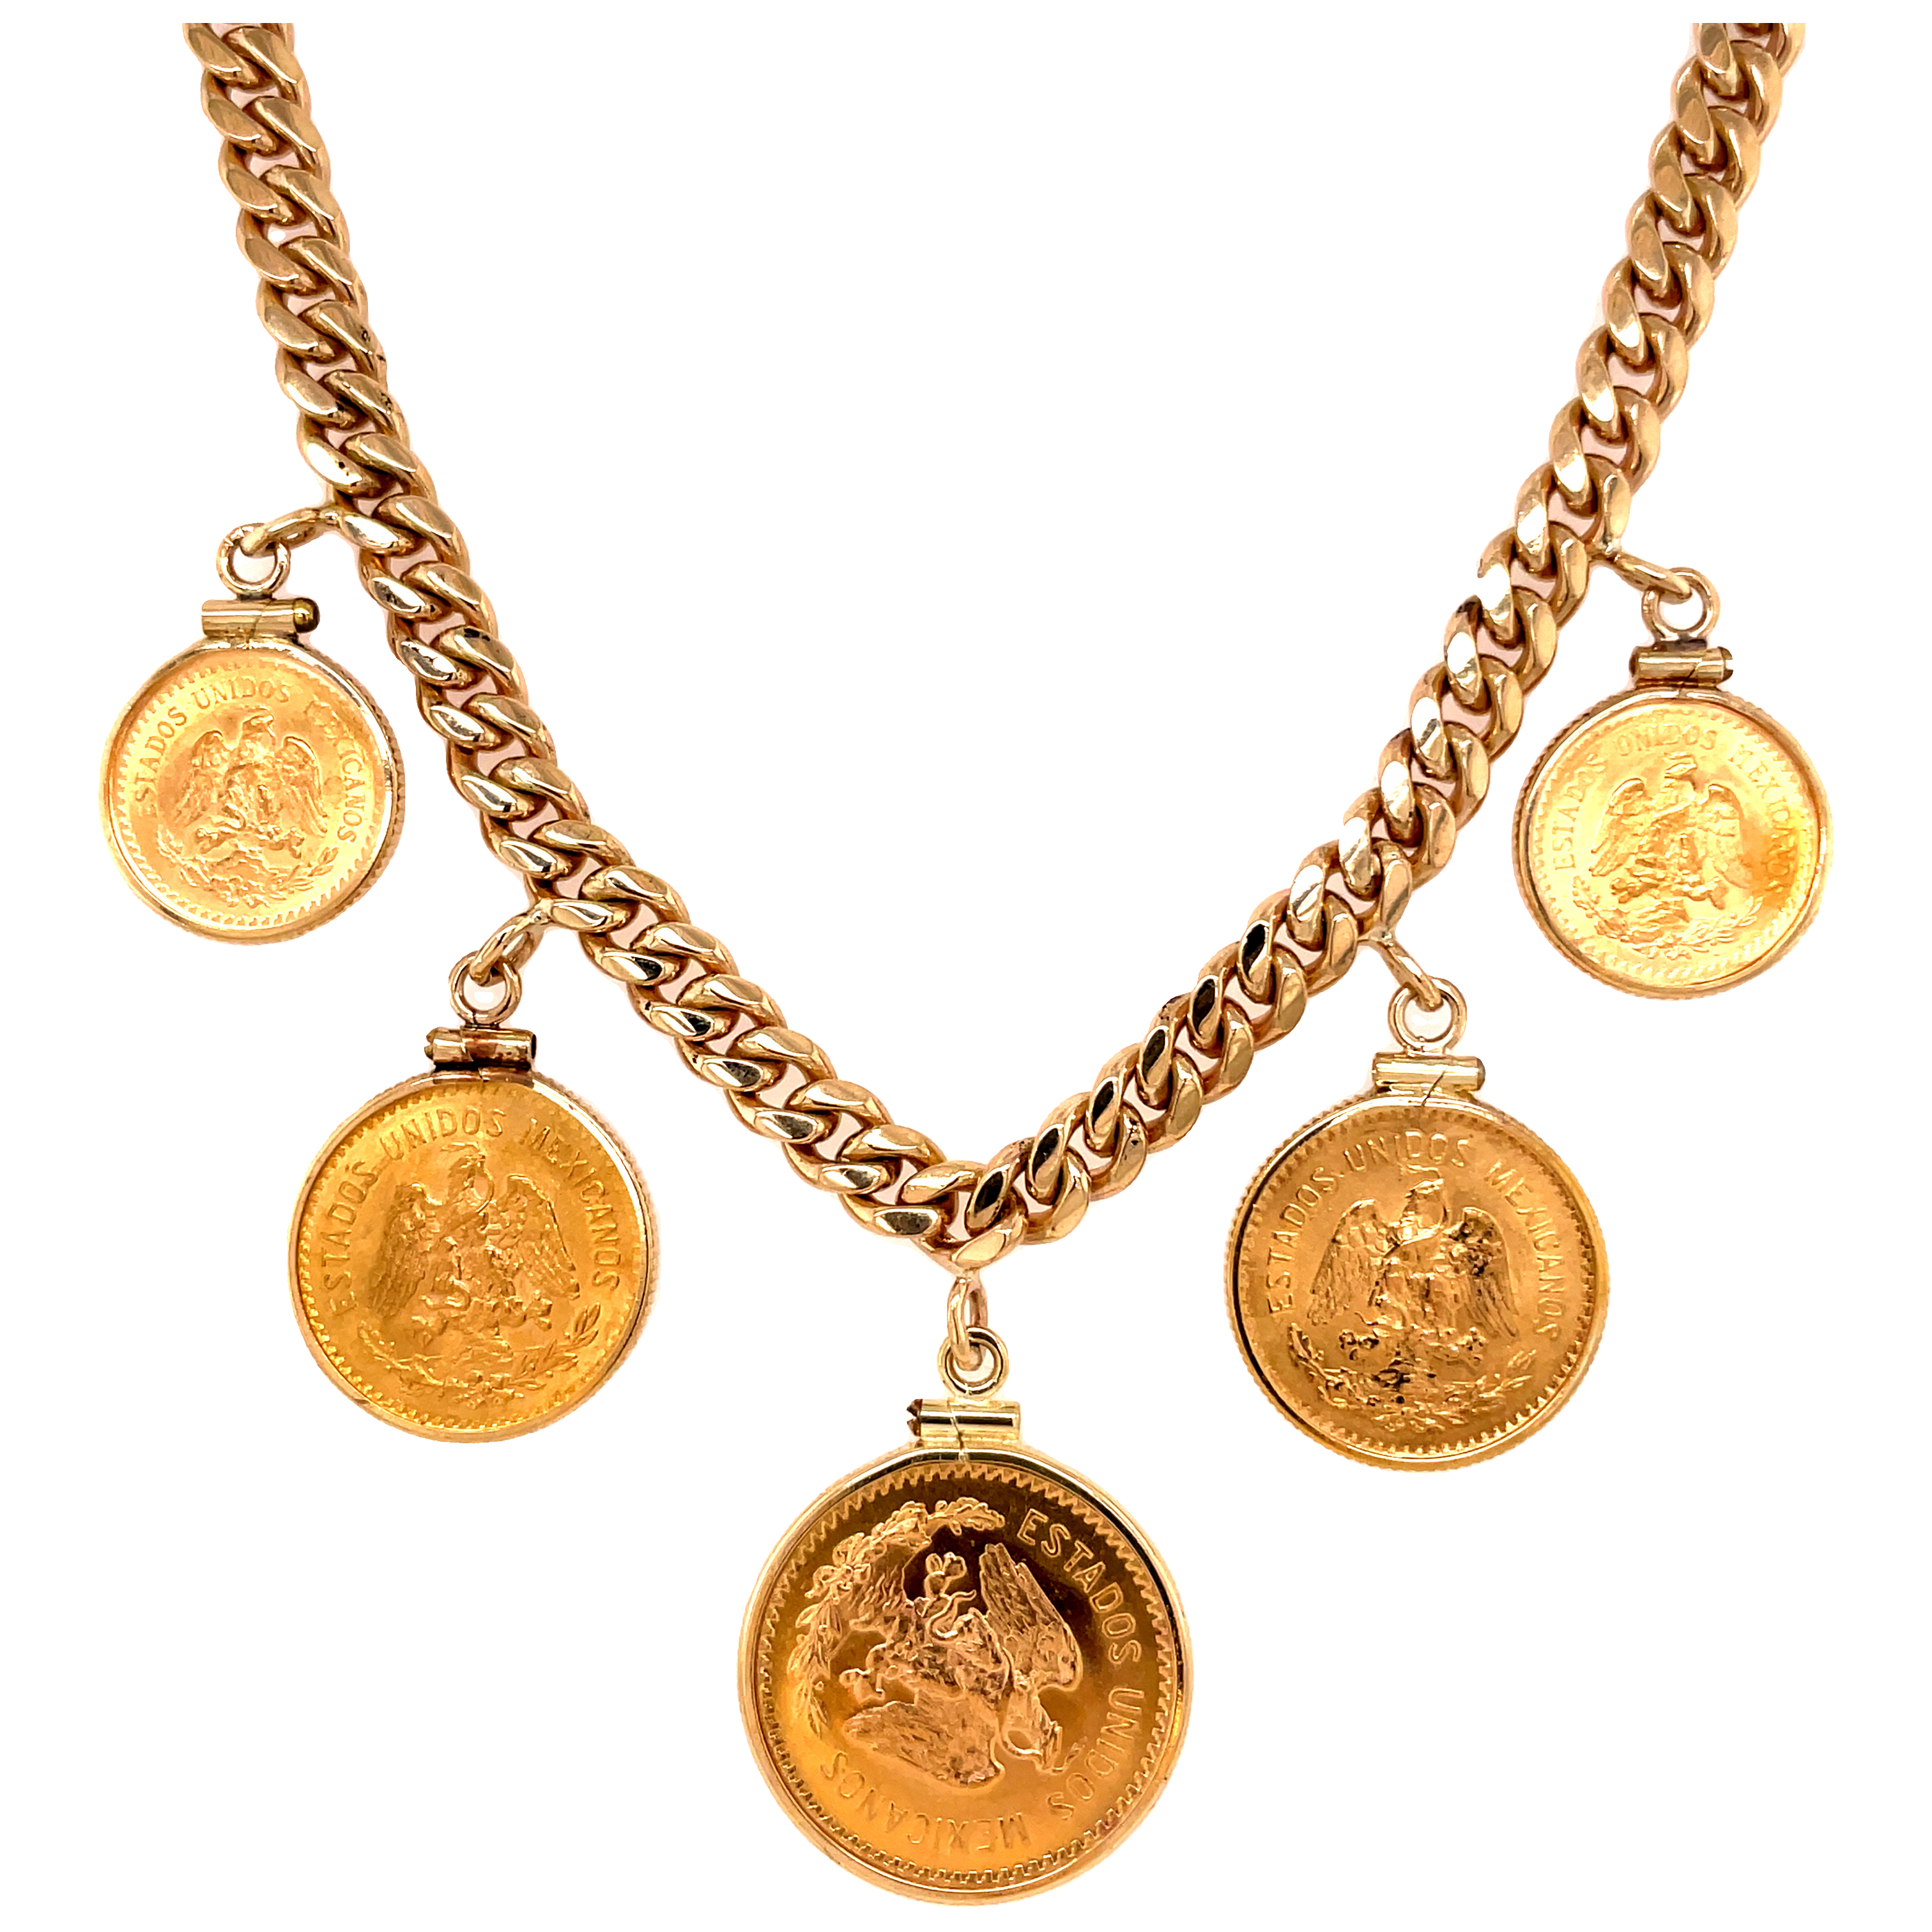 This Gold Coin Pendant Necklace is crafted of solid 22k yellow gold. The coin selection includes two 2.5 pesos coins from 1945, measuring 16.30 mm; two 5 pesos coins from 1906, measuring 19.71 mm; and one 10 pesos coin from 1959, measuring 24.00 mm. The coins are set in a 14k curb link chain, 18" in length. This necklace is in great condition and features a secure box clasp.